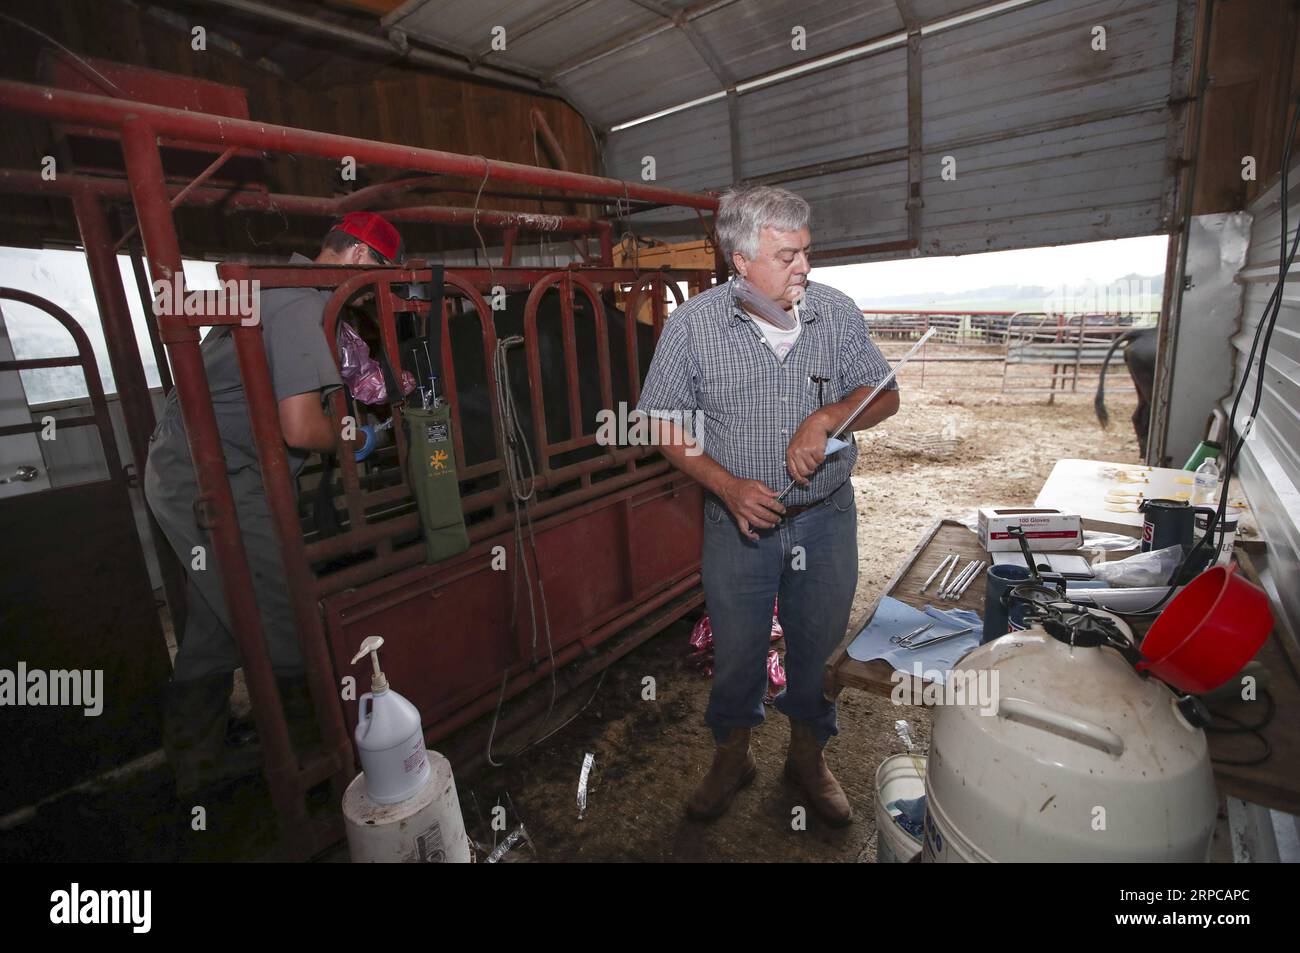 (190629) -- ATLANTIC (U.S.), June 29, 2019 -- Bill Pellett s long-time business partner Phil Ham (R) prepares a syringe as his son Cody Ham carries out artificial insemination procedures for a cow on Bill Pellett s farm in Atlantic, Iowa, the United States, on June 20, 2019. Bill Pellett, a fifth-generation farmer in Atlantic, a small city in the U.S. Midwestern state of Iowa, has found a cost-effective way to raise better calves each year without purchasing new bulls -- artificial insemination (AI). ) TO GO WITH Feature: U.S. cattle farmer turns to artificial insemination for better quality b Stock Photo